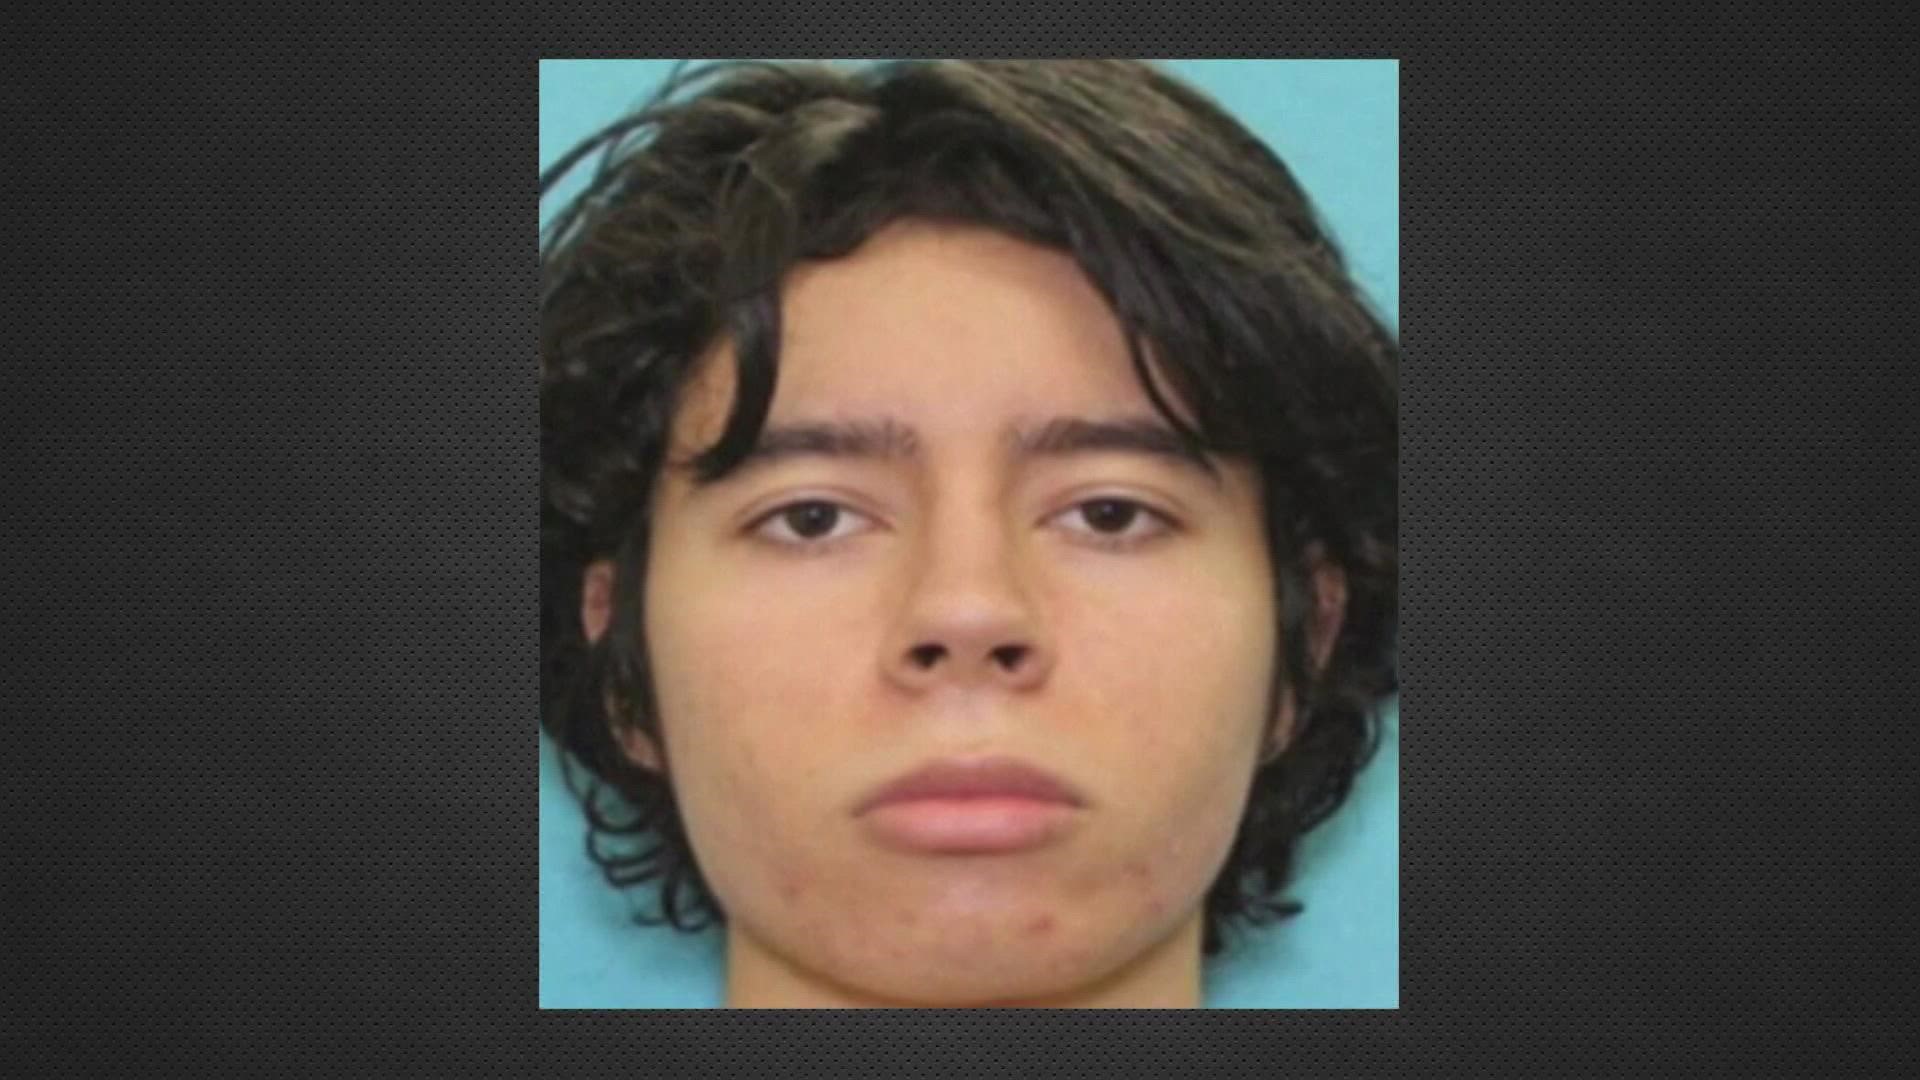 Robb Elementary shooter, Salvador Ramos purchased two AR-15 rifles days before the shooting in Uvalde.